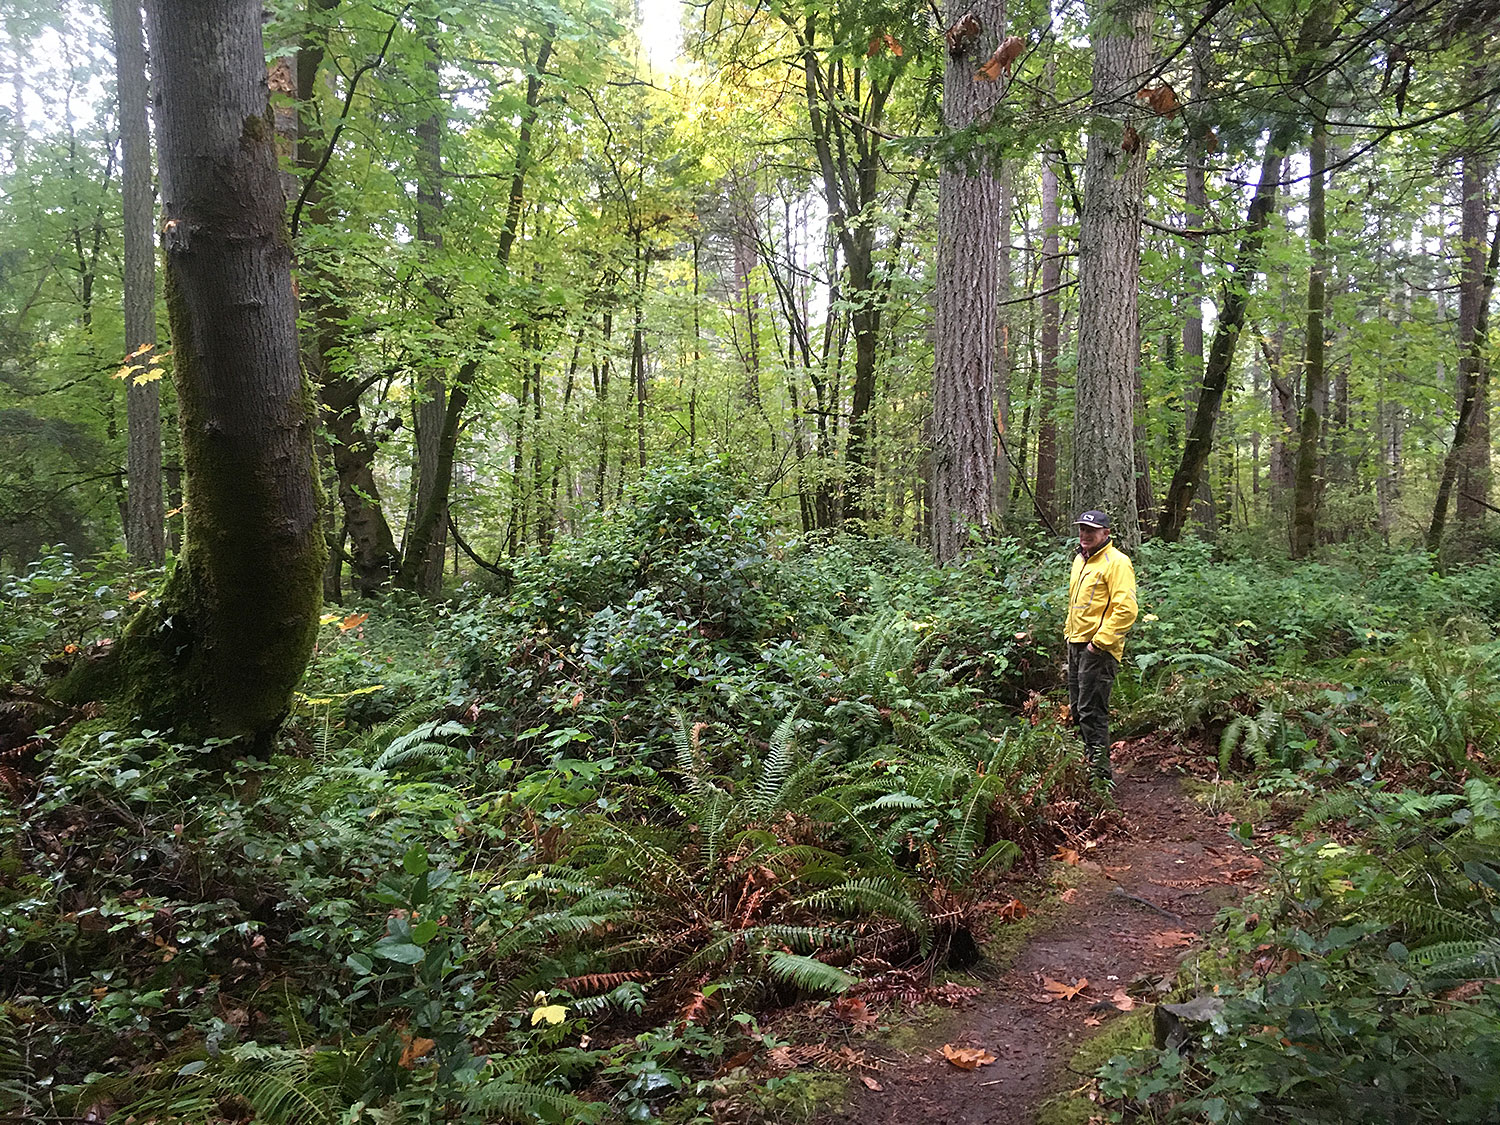 A person standing on a trail in the forest.